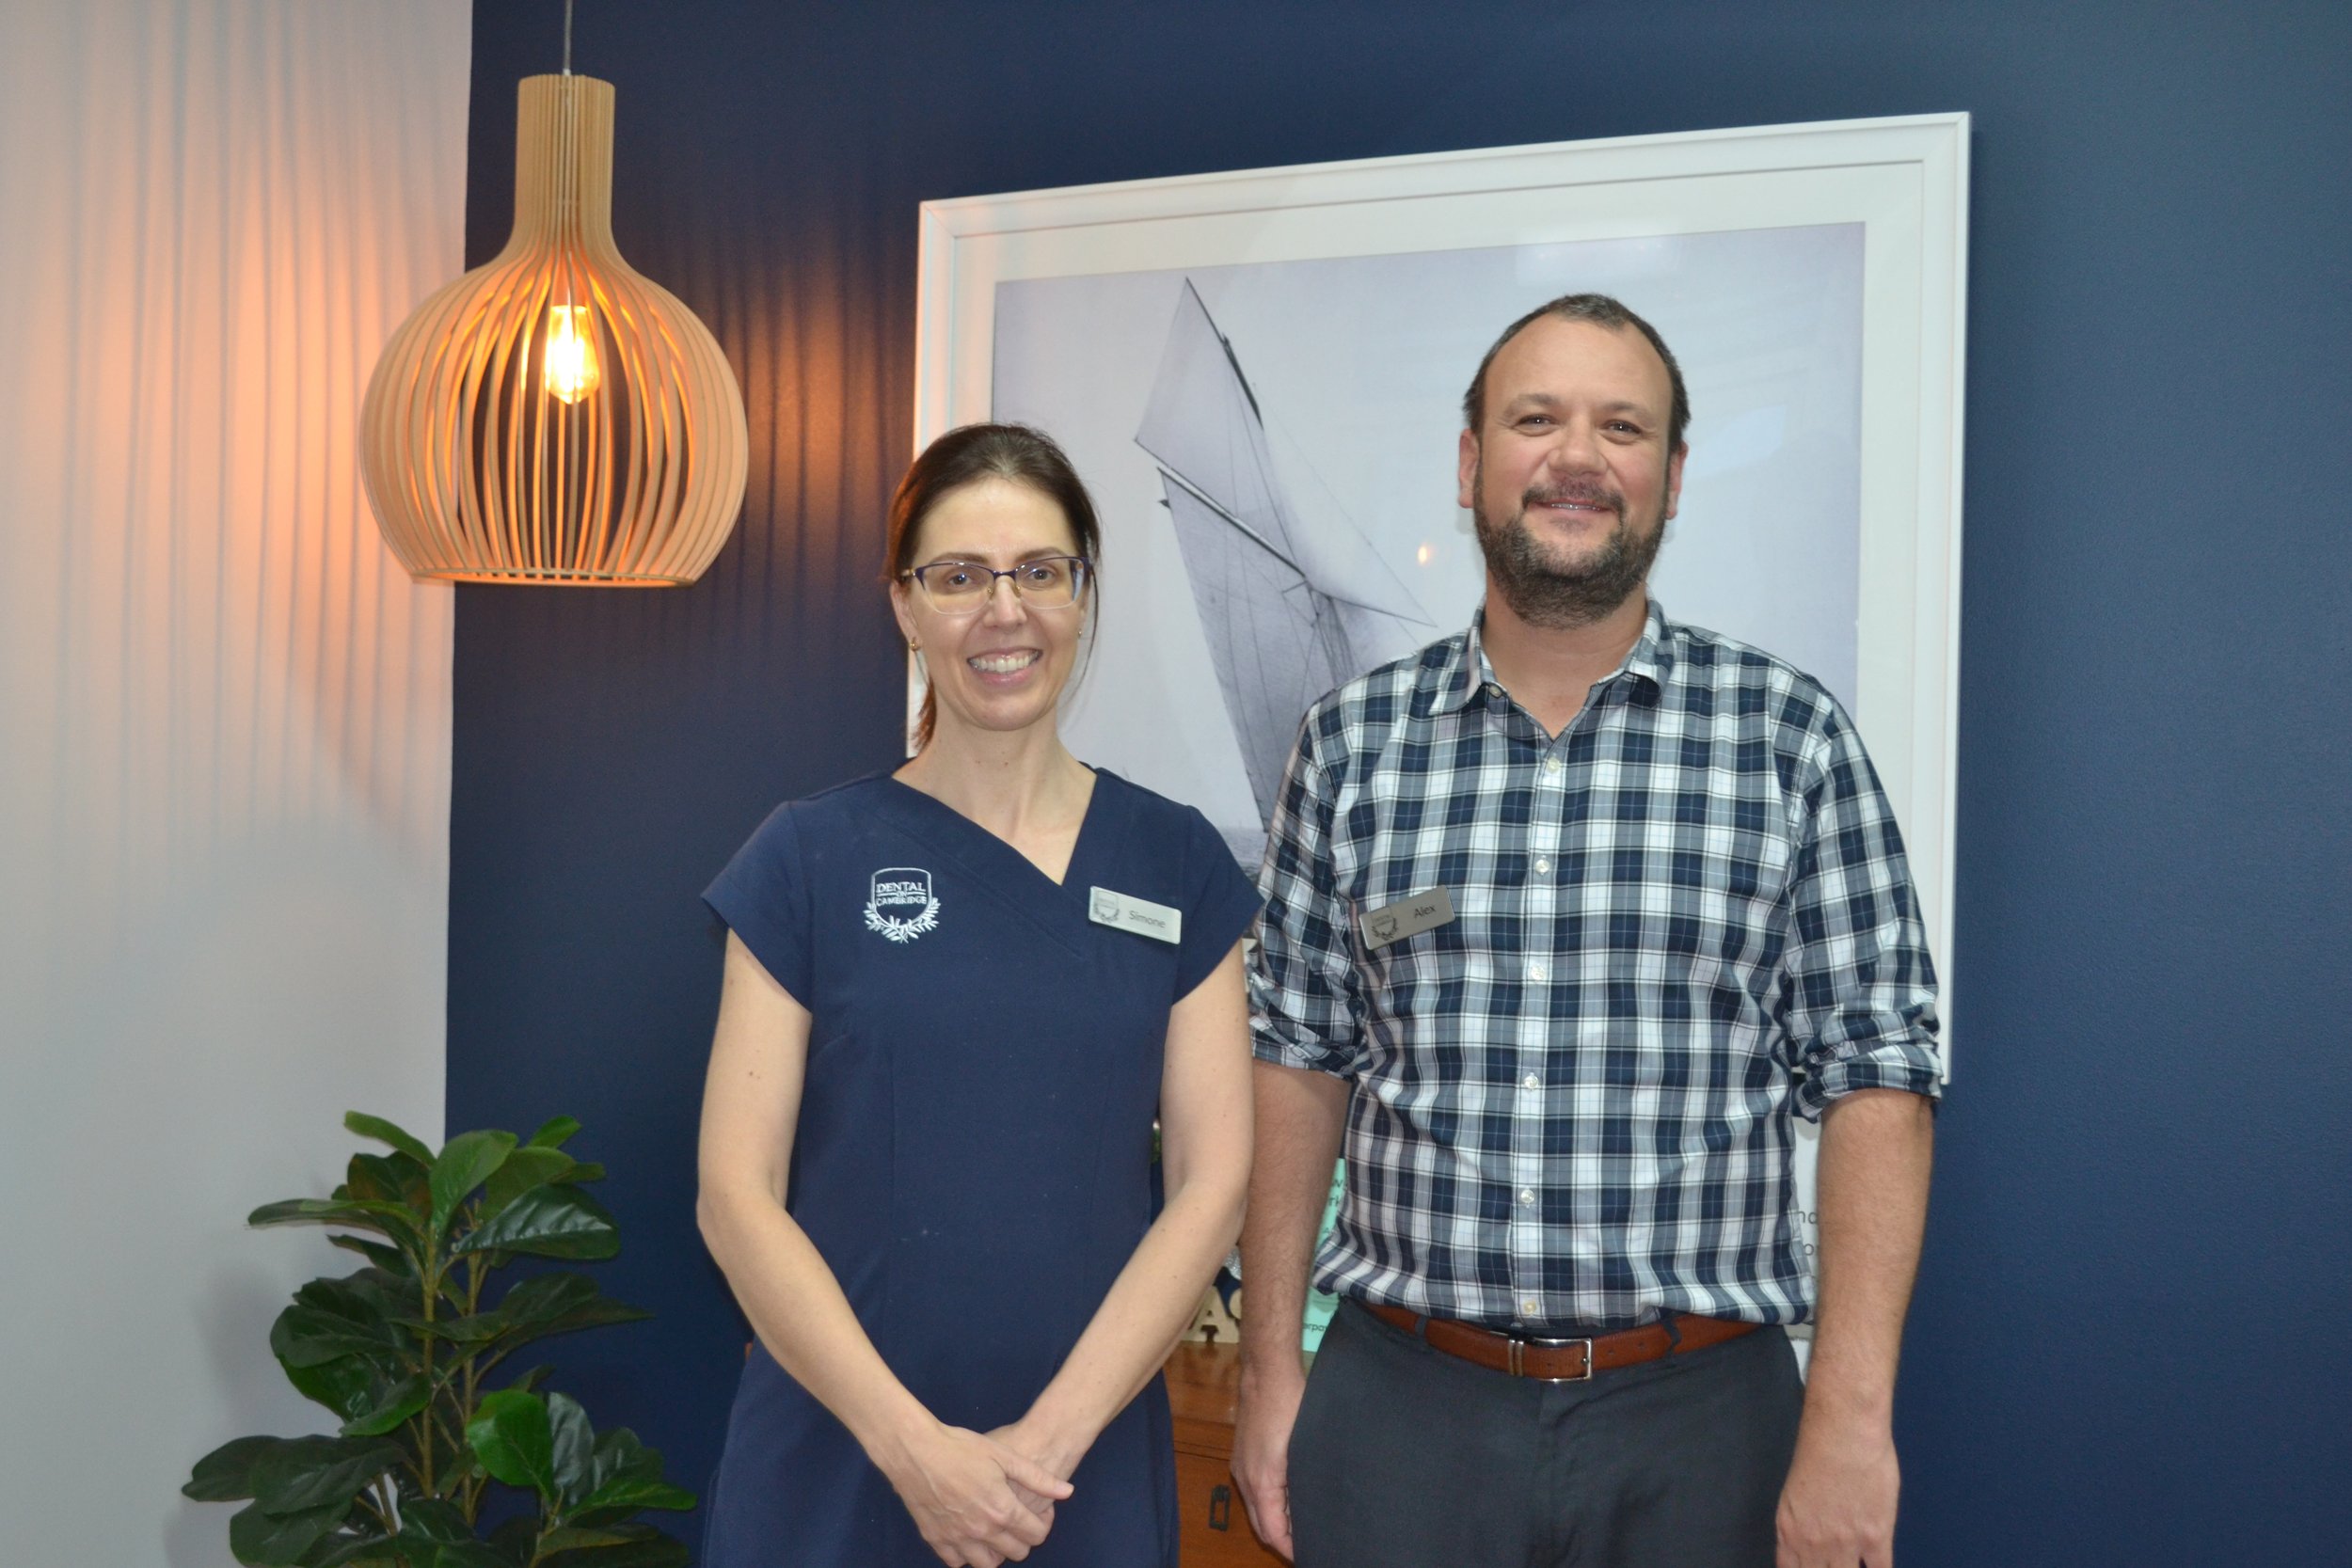 A New Smile at Dental on Cambridge